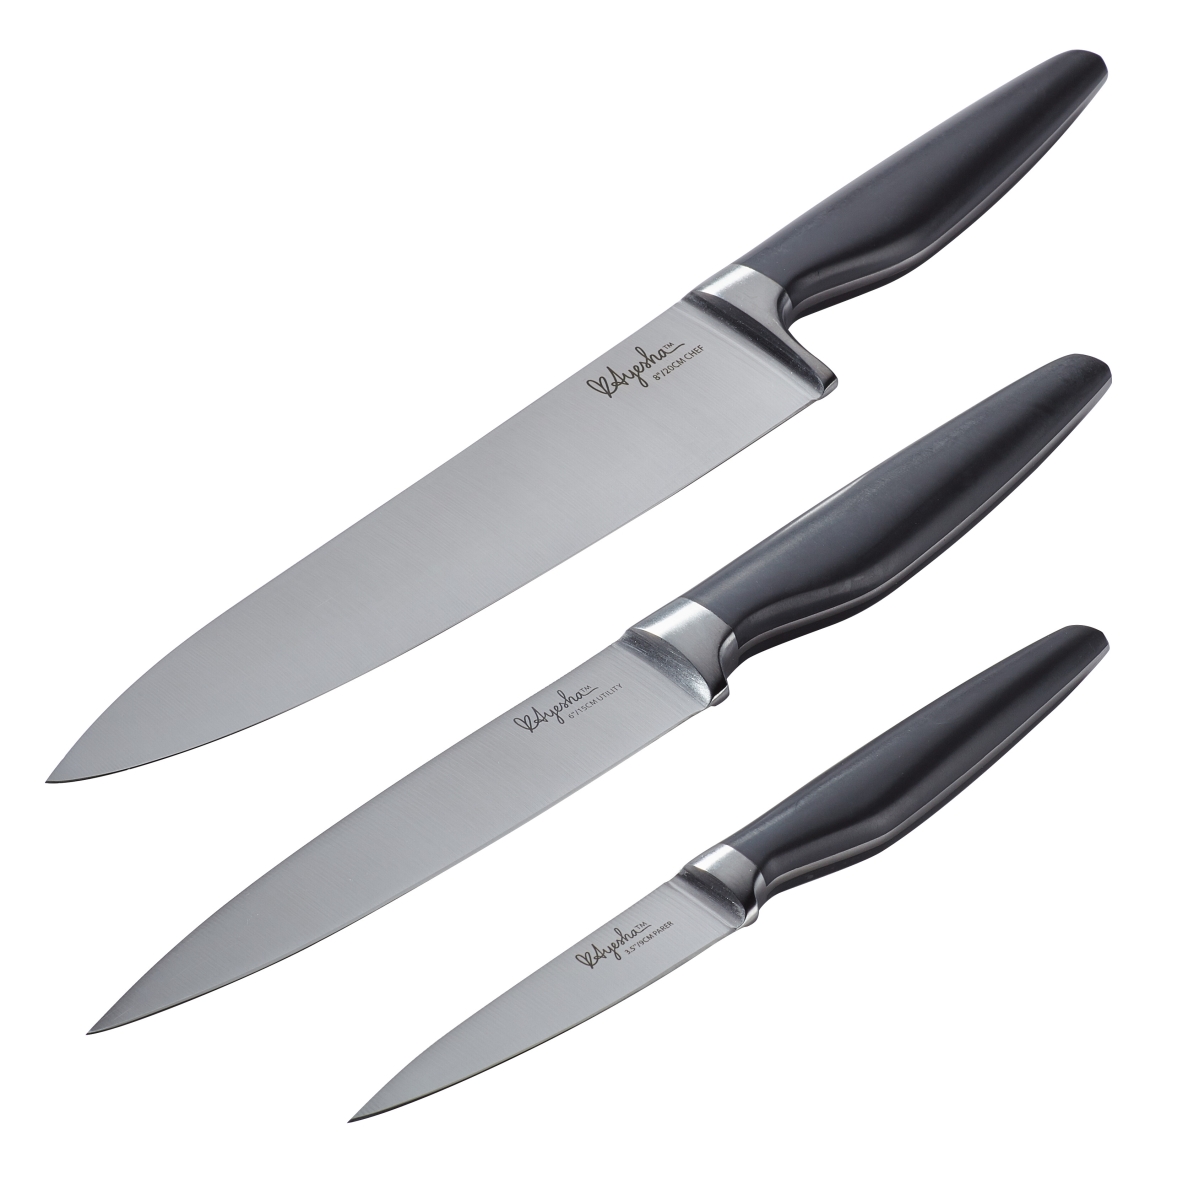 46956 Japanese Steel Cooking Knife Set, Charcoal Gray - 3 Piece